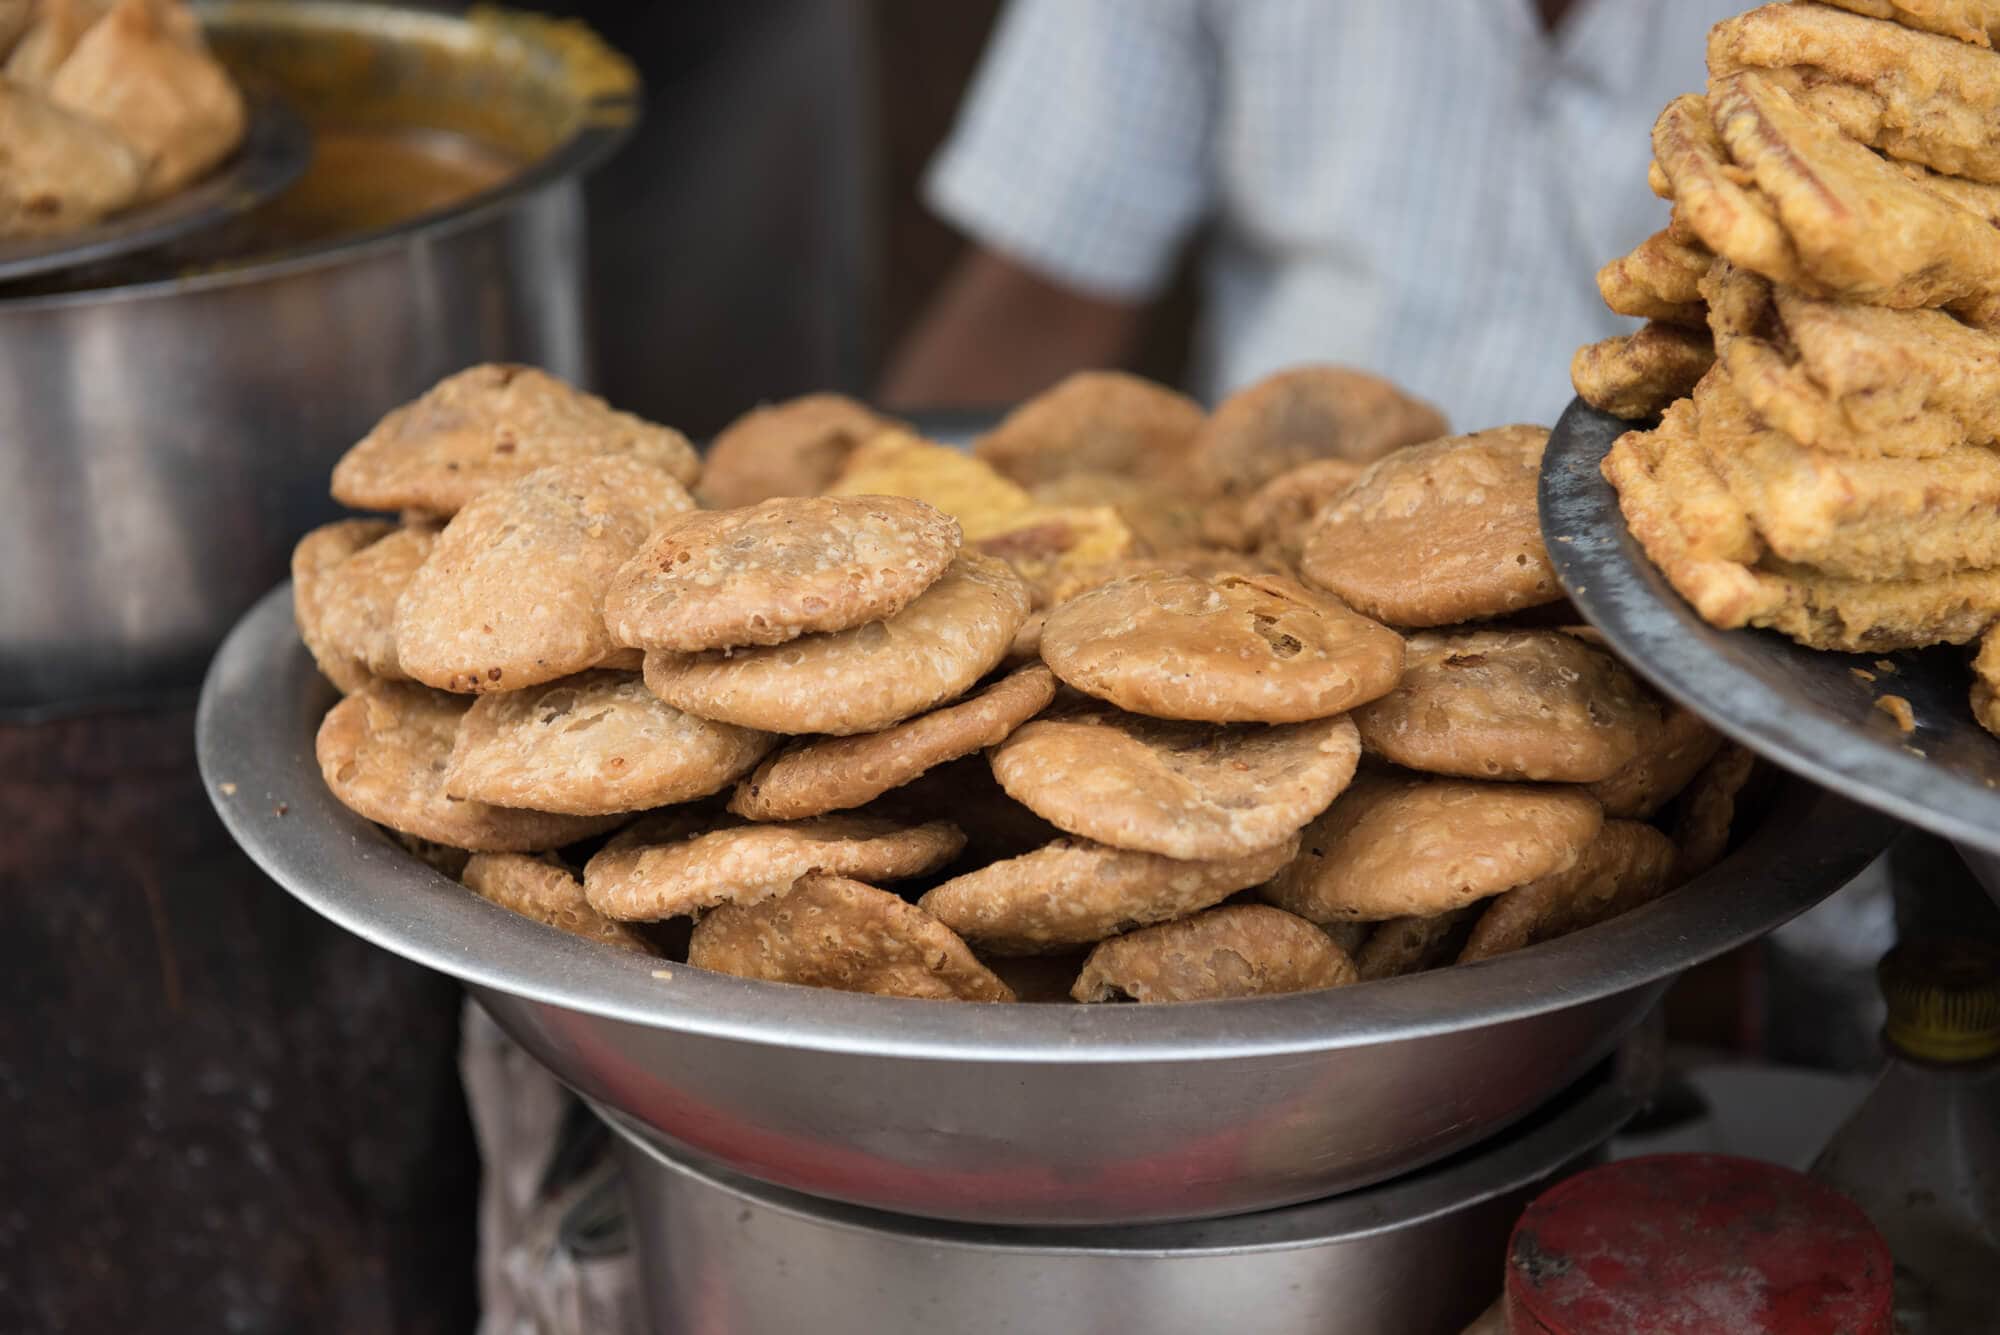 A first timer's guide to Delhi, India - Street food